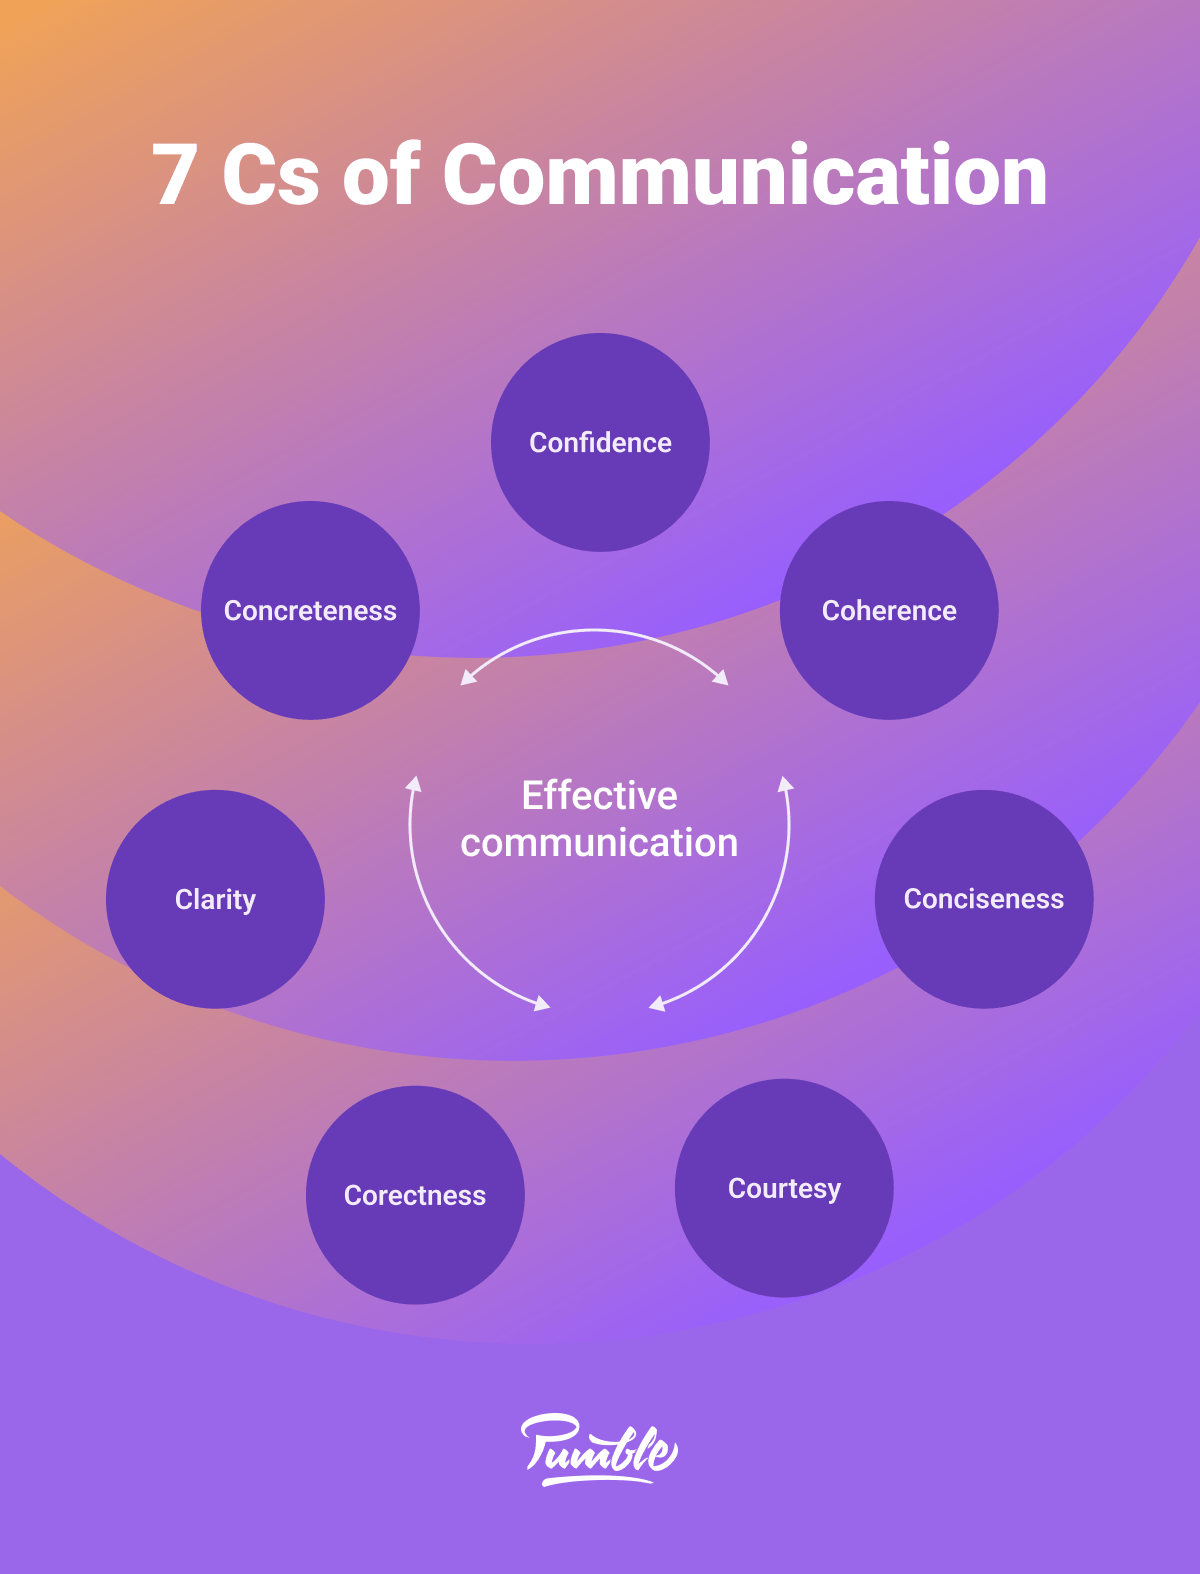 Professional Communication: How to Communicate With Clarity